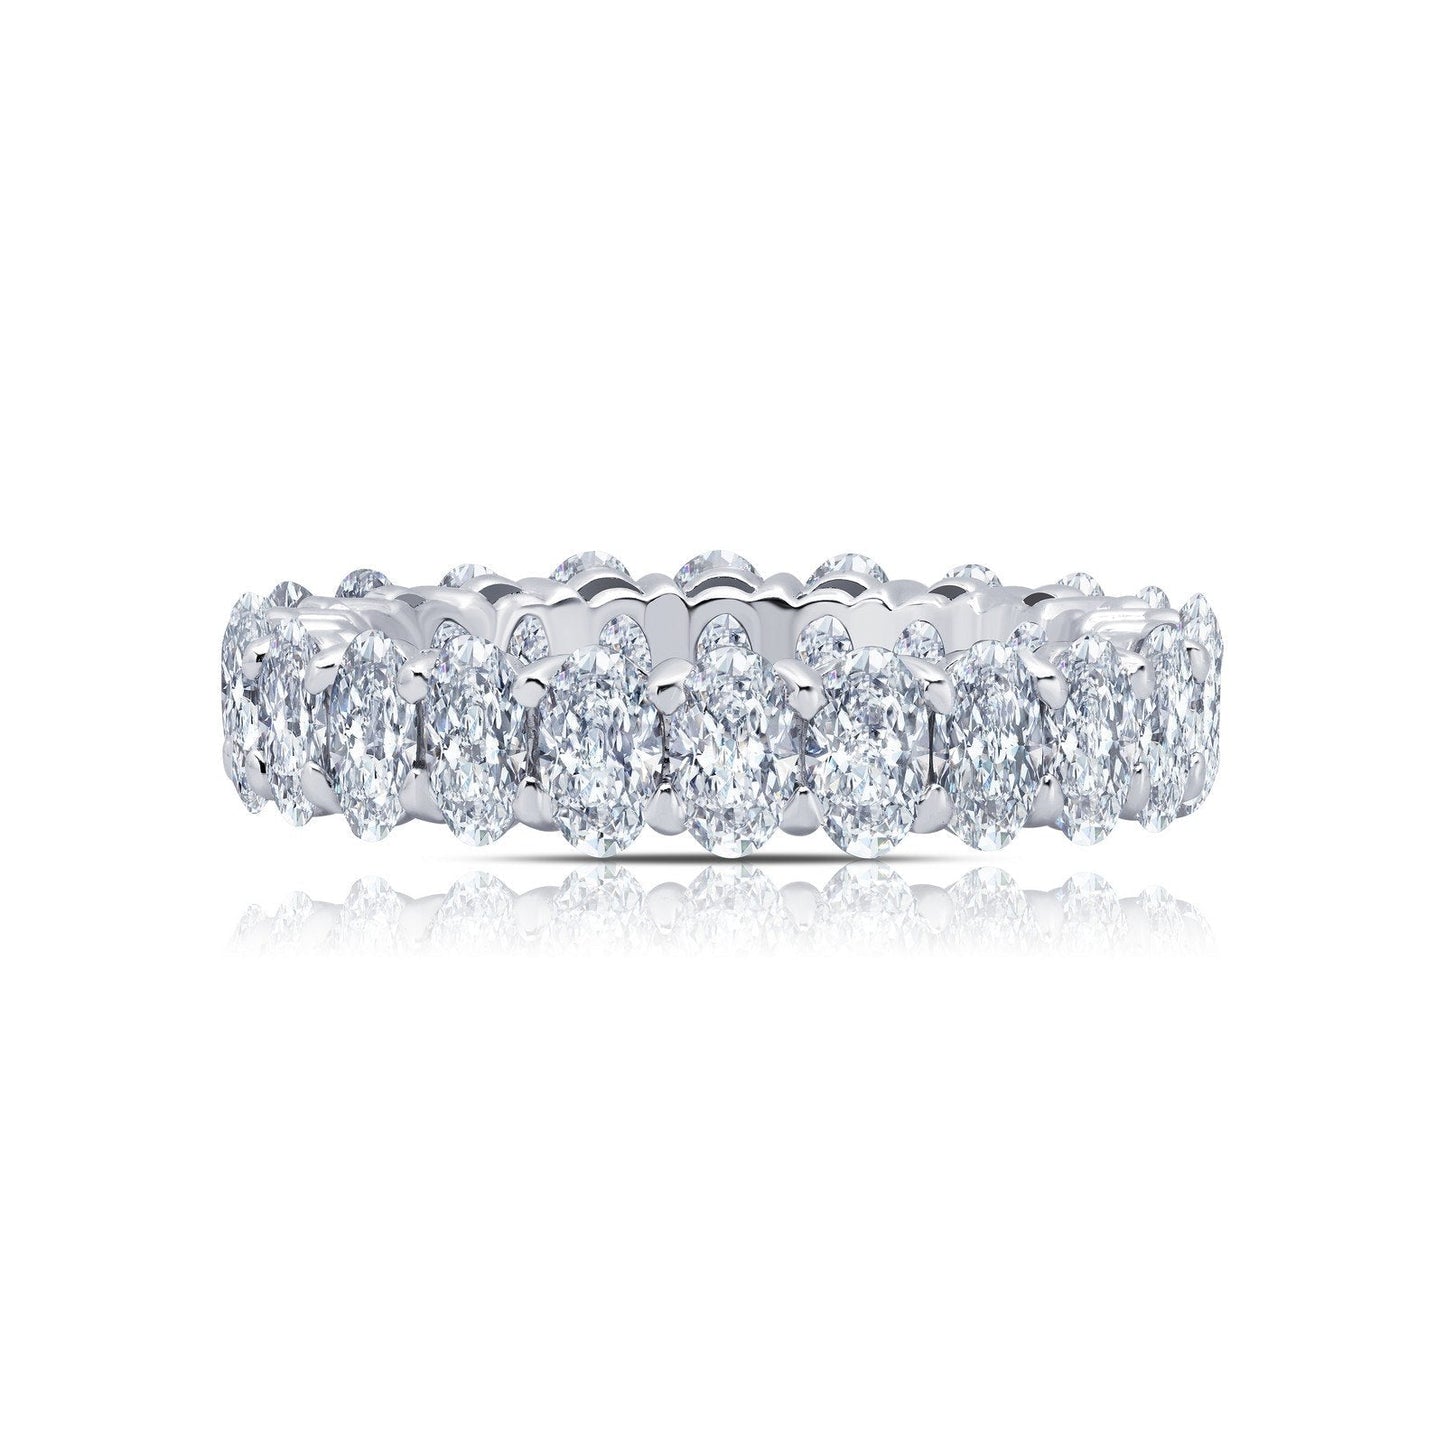 Load image into Gallery viewer, Lafonn 4.62 CTW Anniversary Eternity Band Simulated Diamond RINGS Size 6 Platinum 4.62 CTS Approx. 5mm (W)
